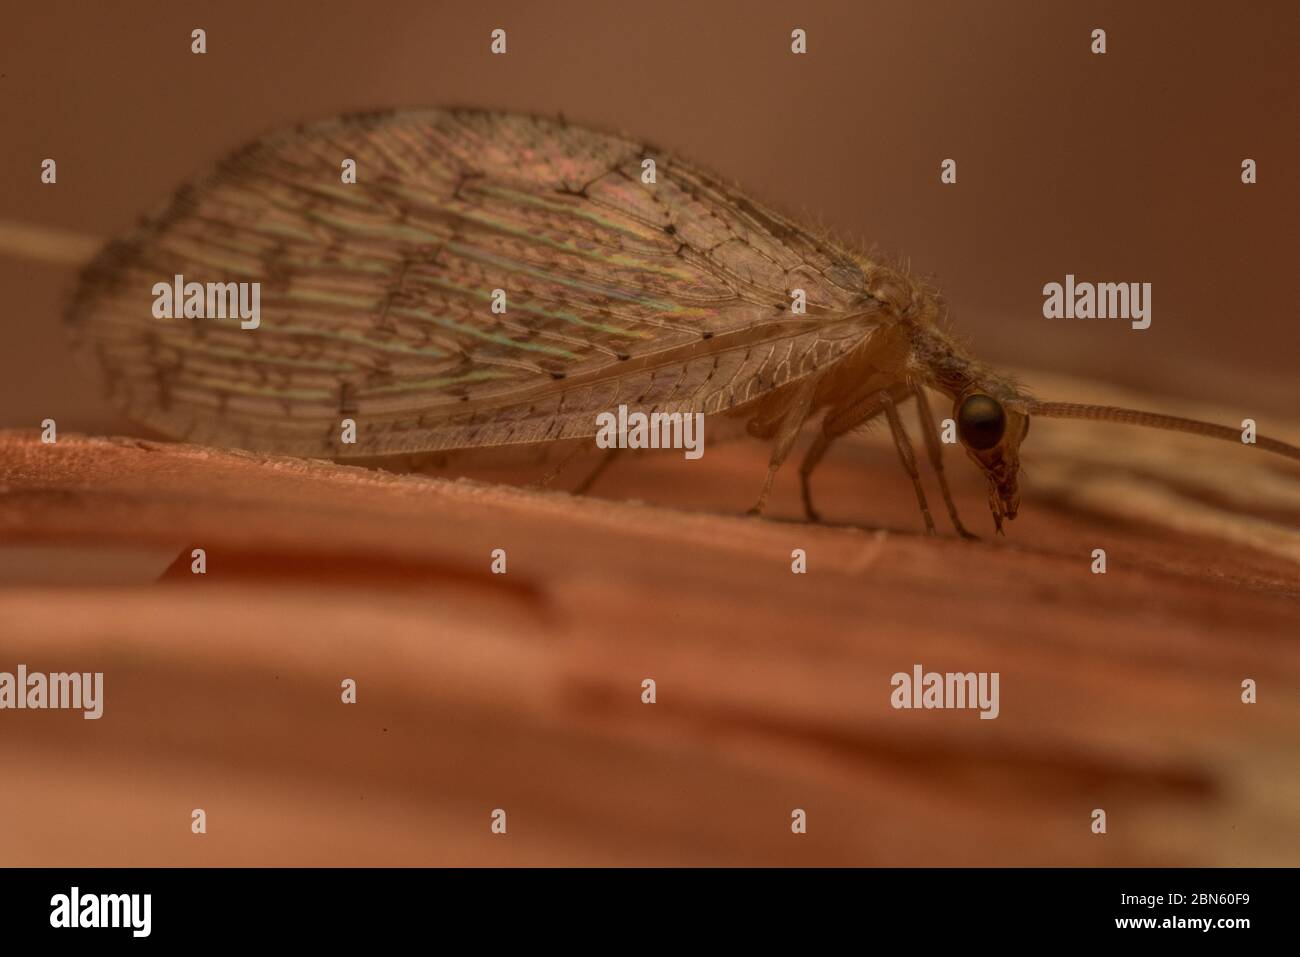 A brown lacewing (Hemerobius species) from a garden in Berkeley, California. These insects are useful to have around as they eat pests. Stock Photo